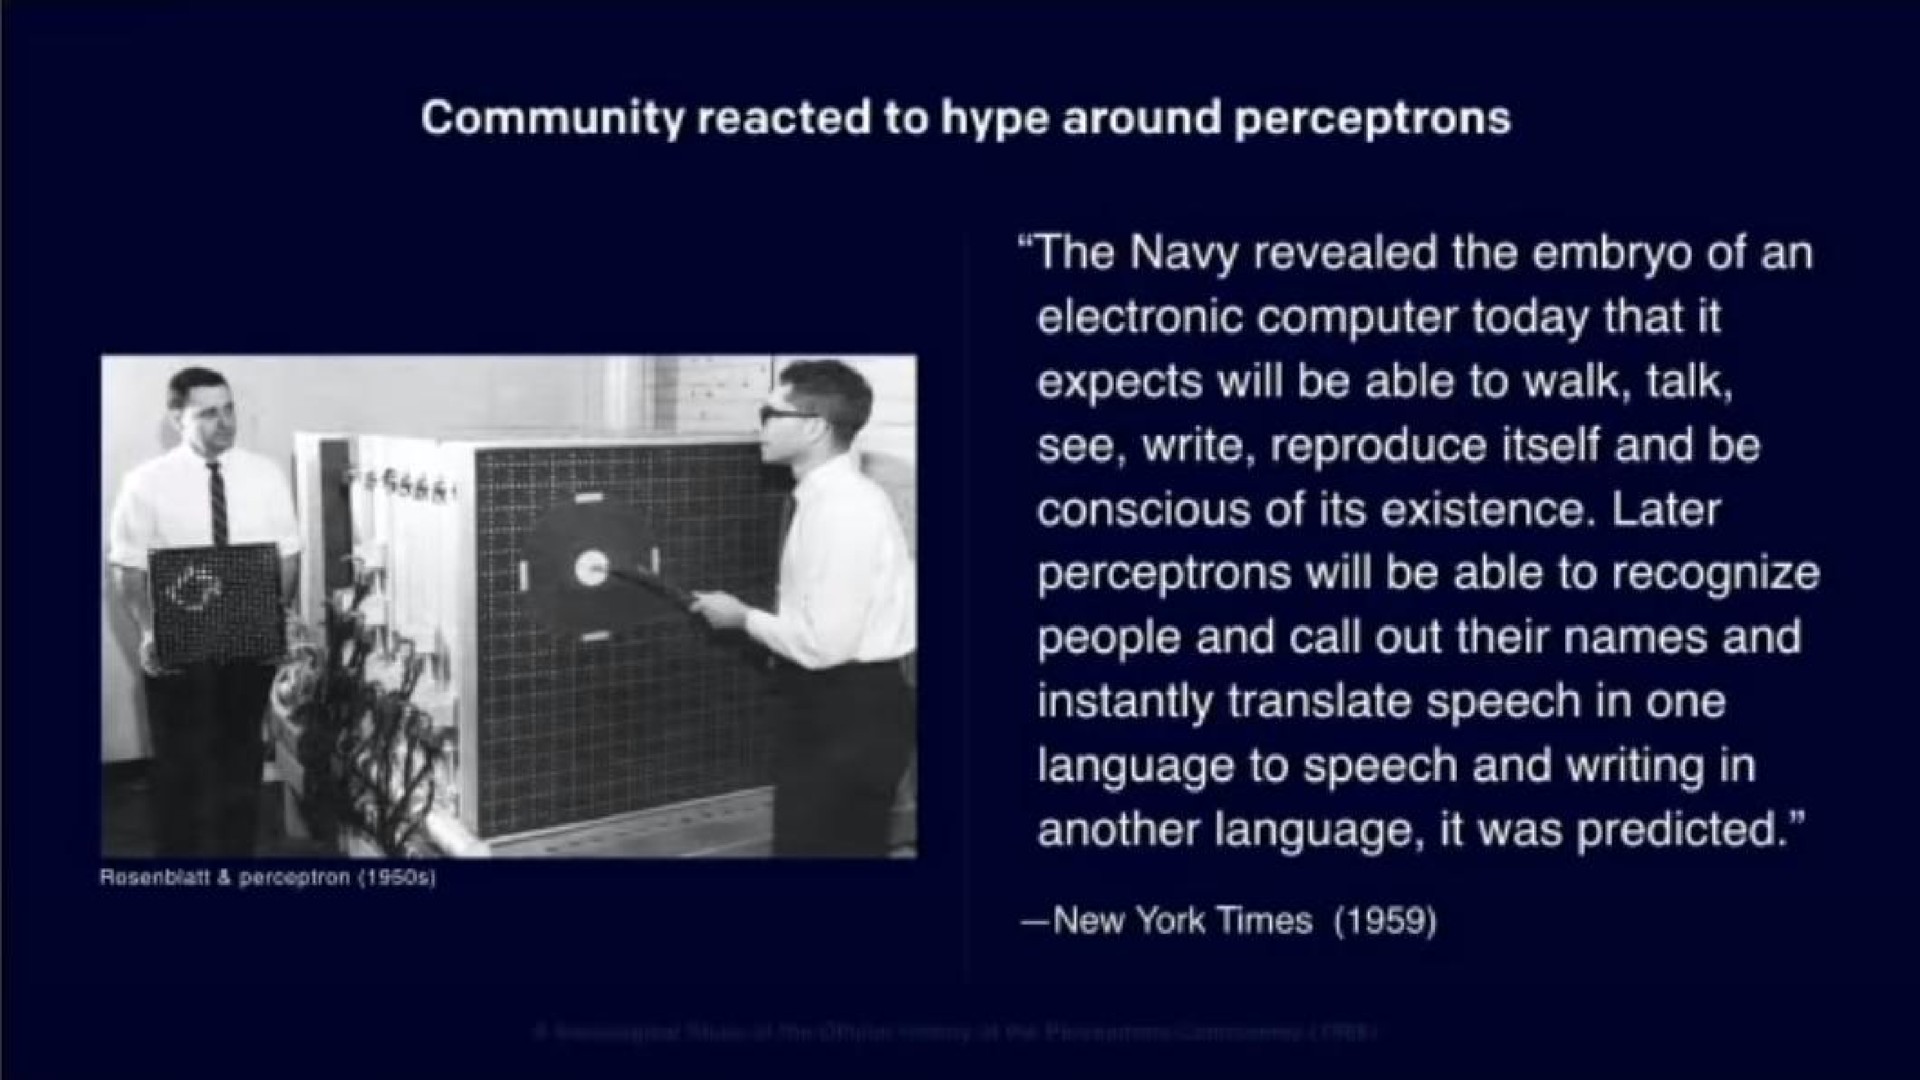 community reacted to around as the navy revealed the embryo of an electronic computer today that it expects will be able to walk talk see write reproduce itself and be conscious of its existence later will be able to recognize people and call out their names and instantly translate speech in one language to speech and writing in another language it was predicted | OpenAI